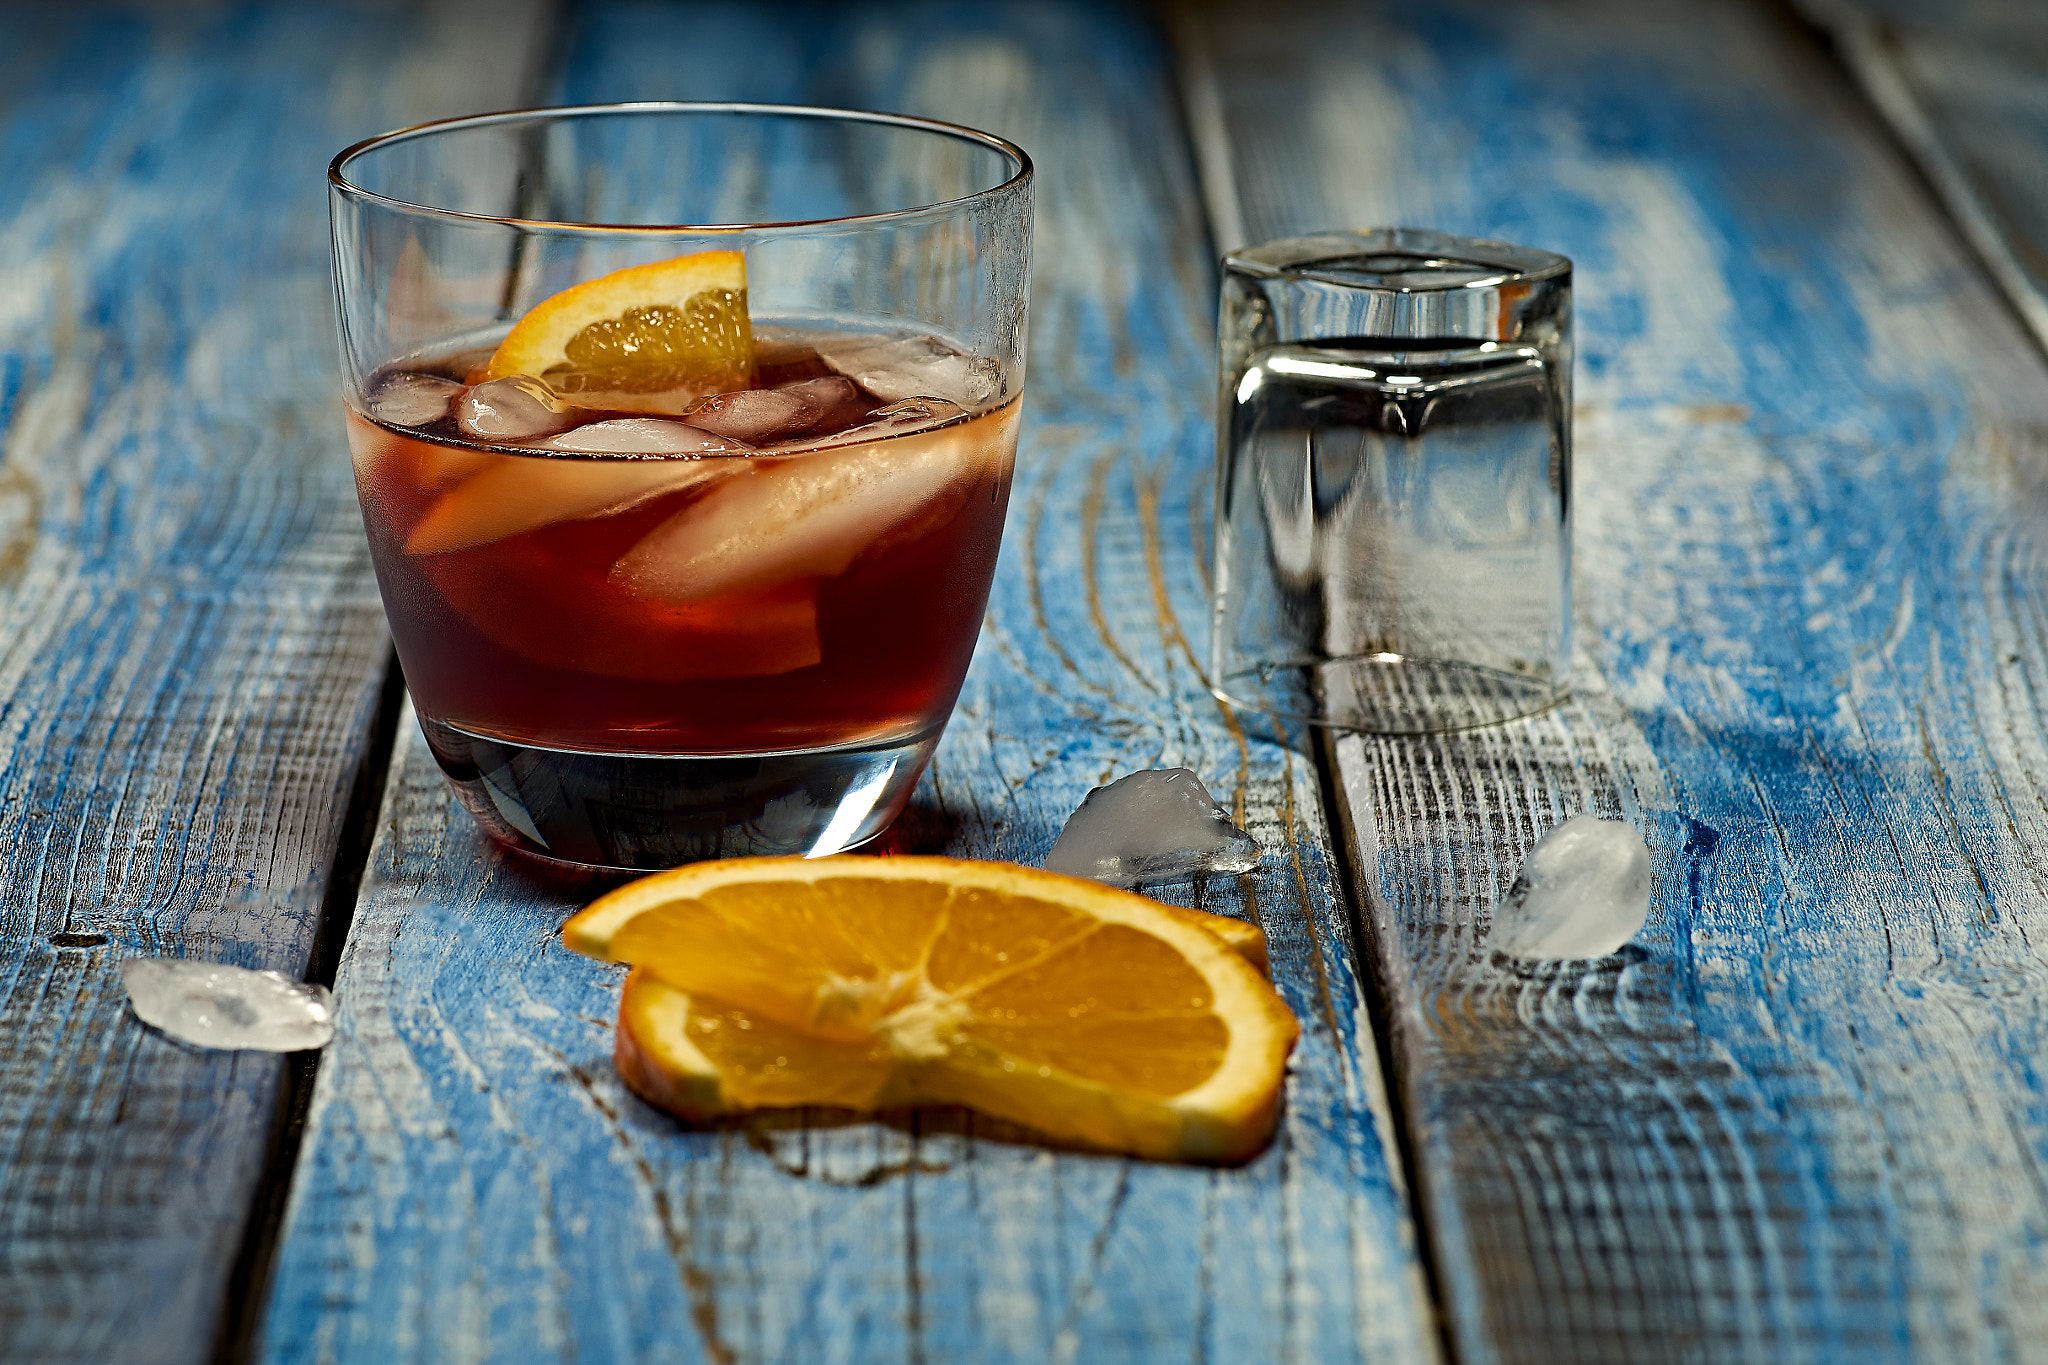 Sony a99 II sample photo. Drink photography | boulevardier photography